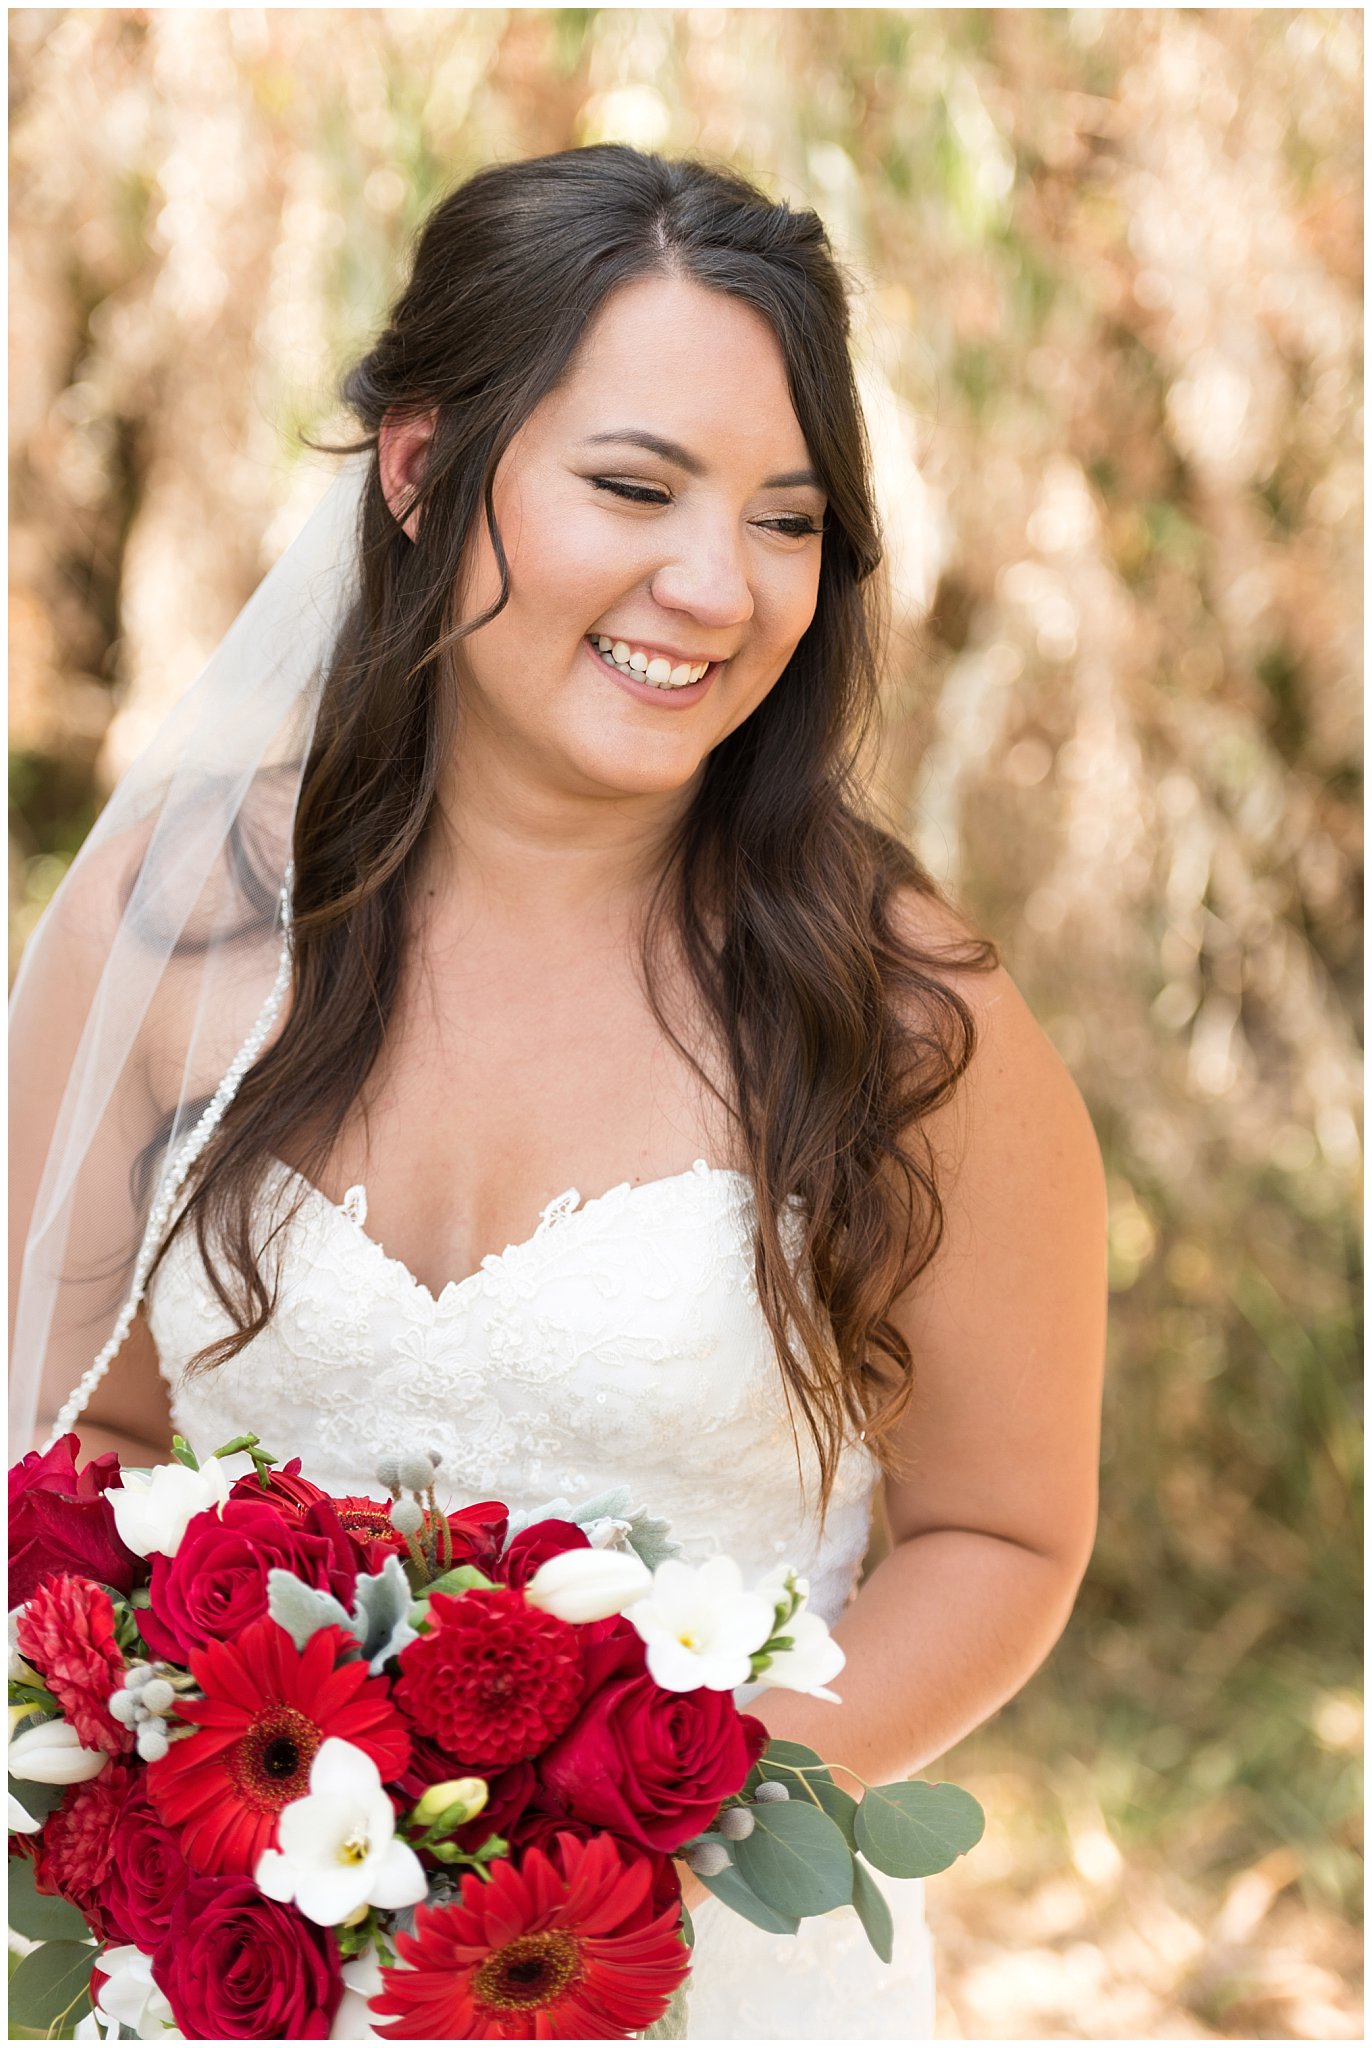 Davis County Wedding | Bride with red rose bouquet | Jessie and Dallin Photography